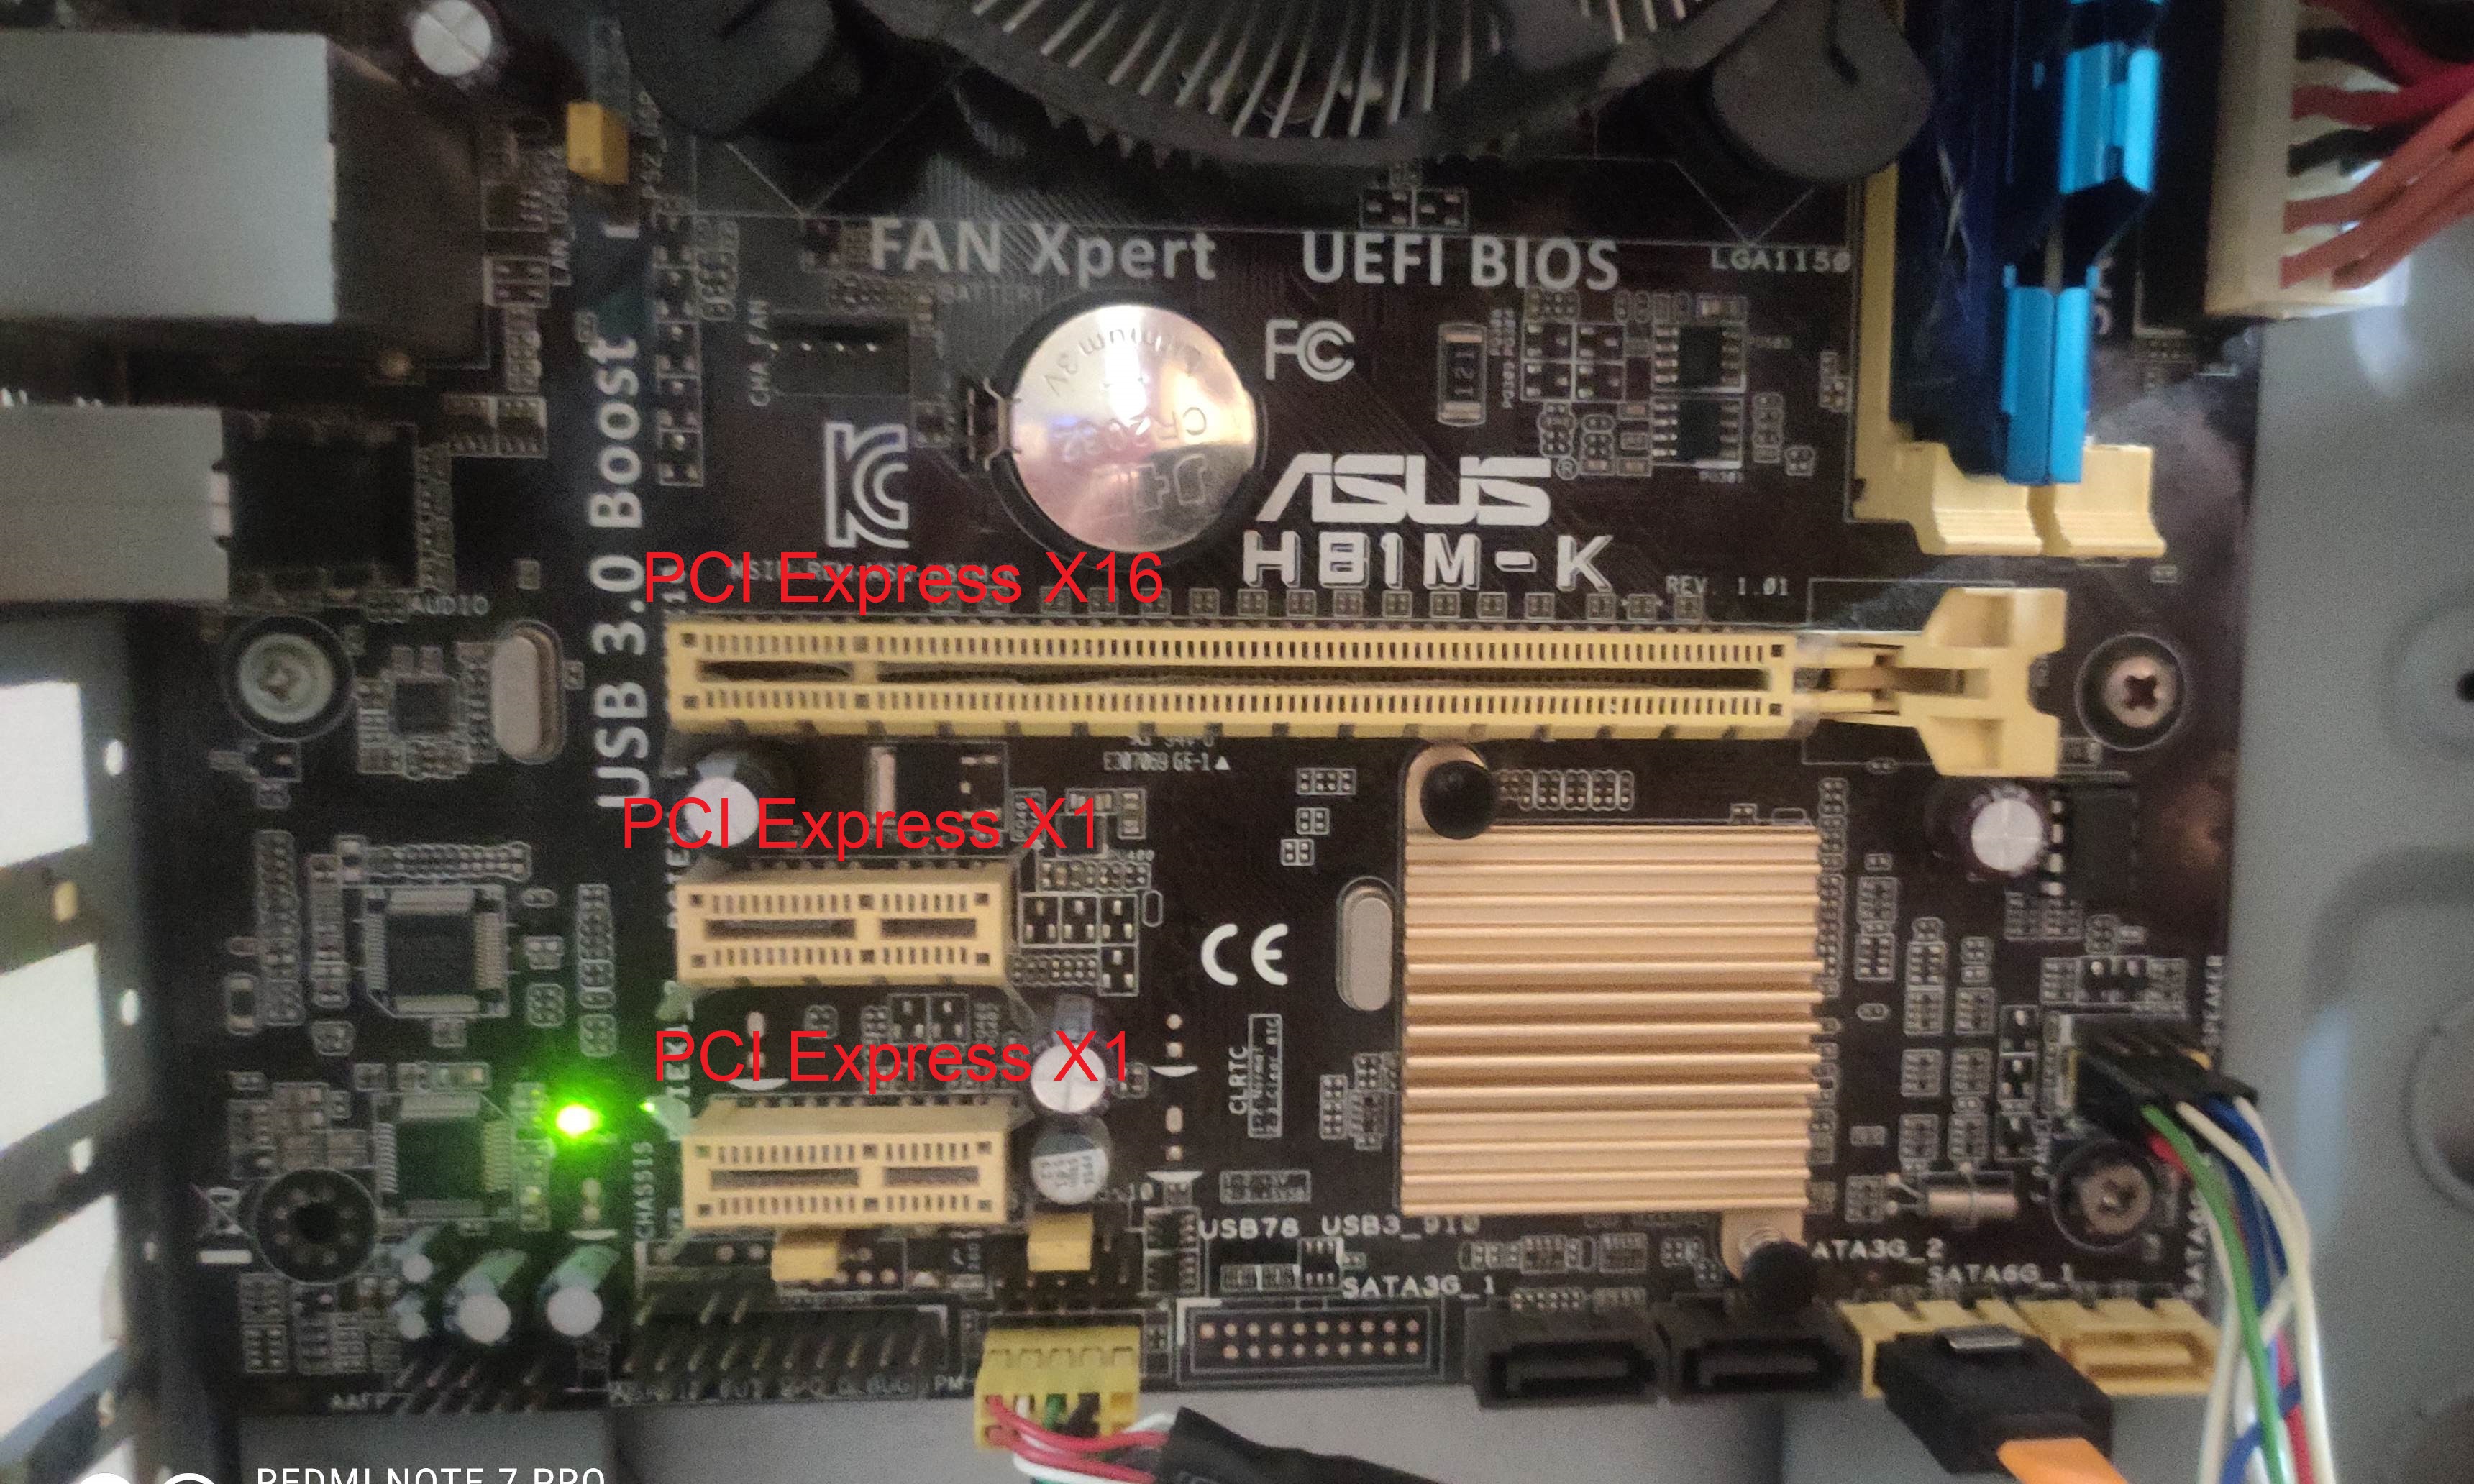 Motherboard with components properly seated and connected